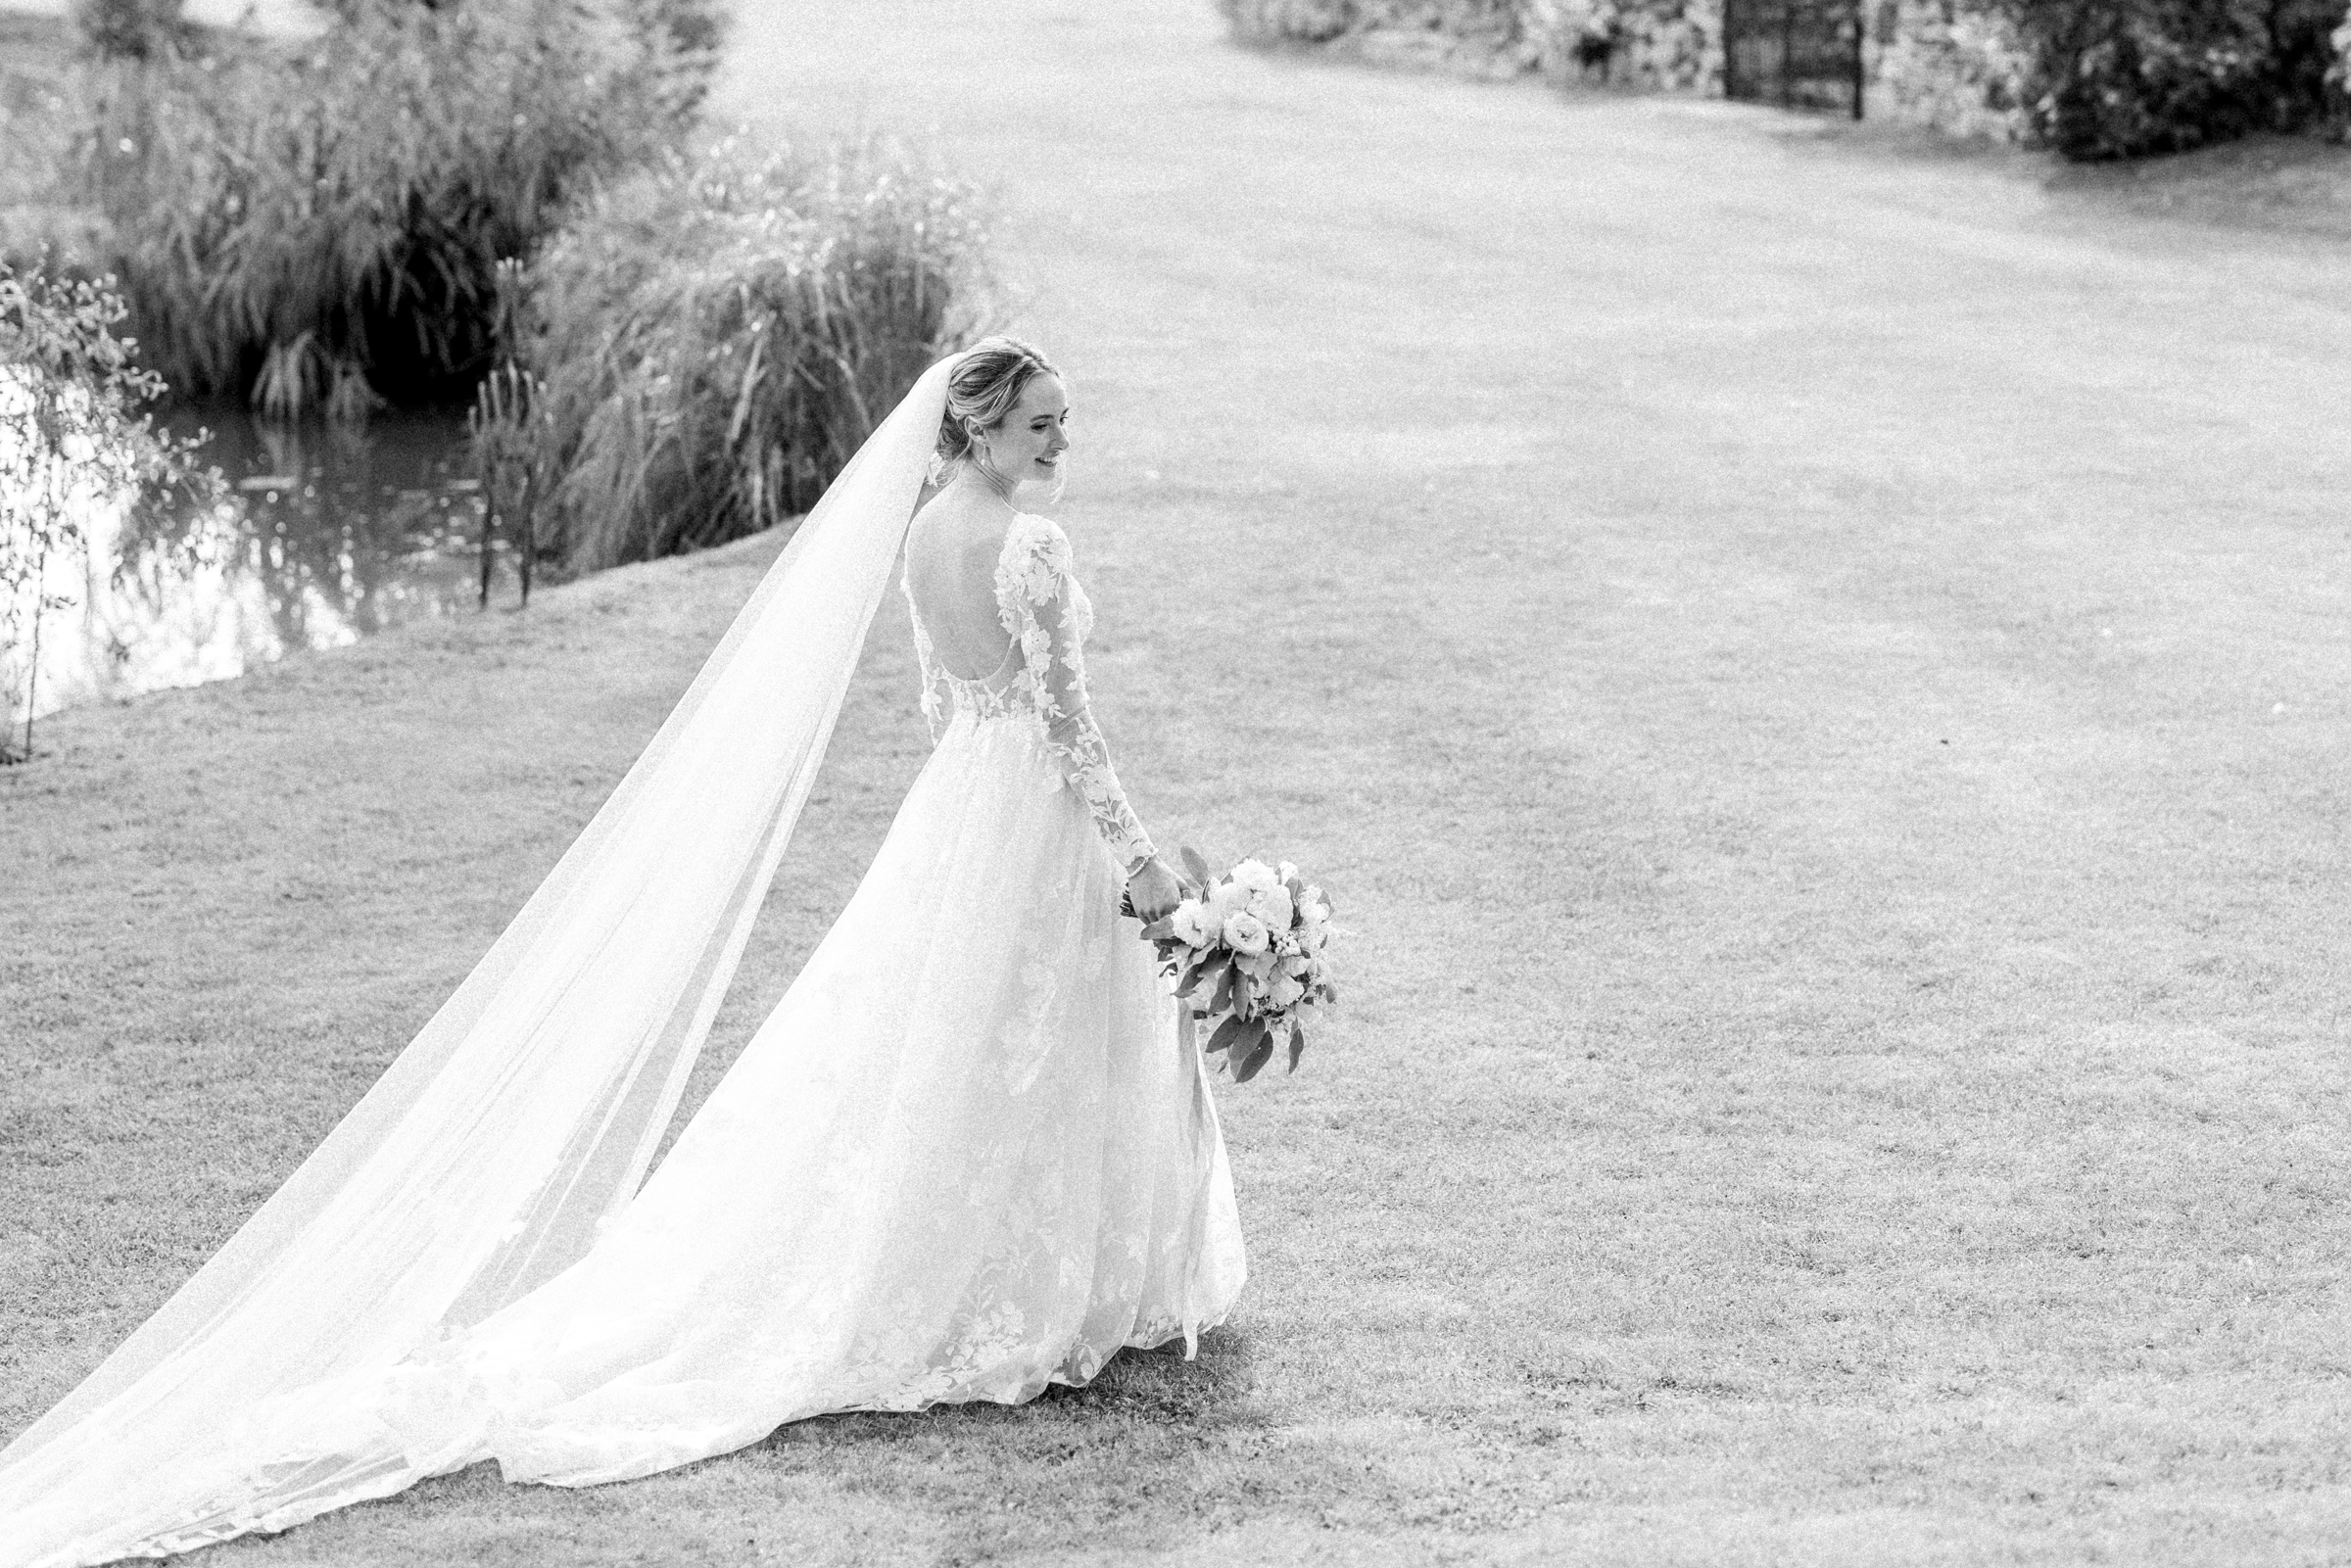 Romantic & Timeless Wedding Photography at Luxury English Country Garden at private family home